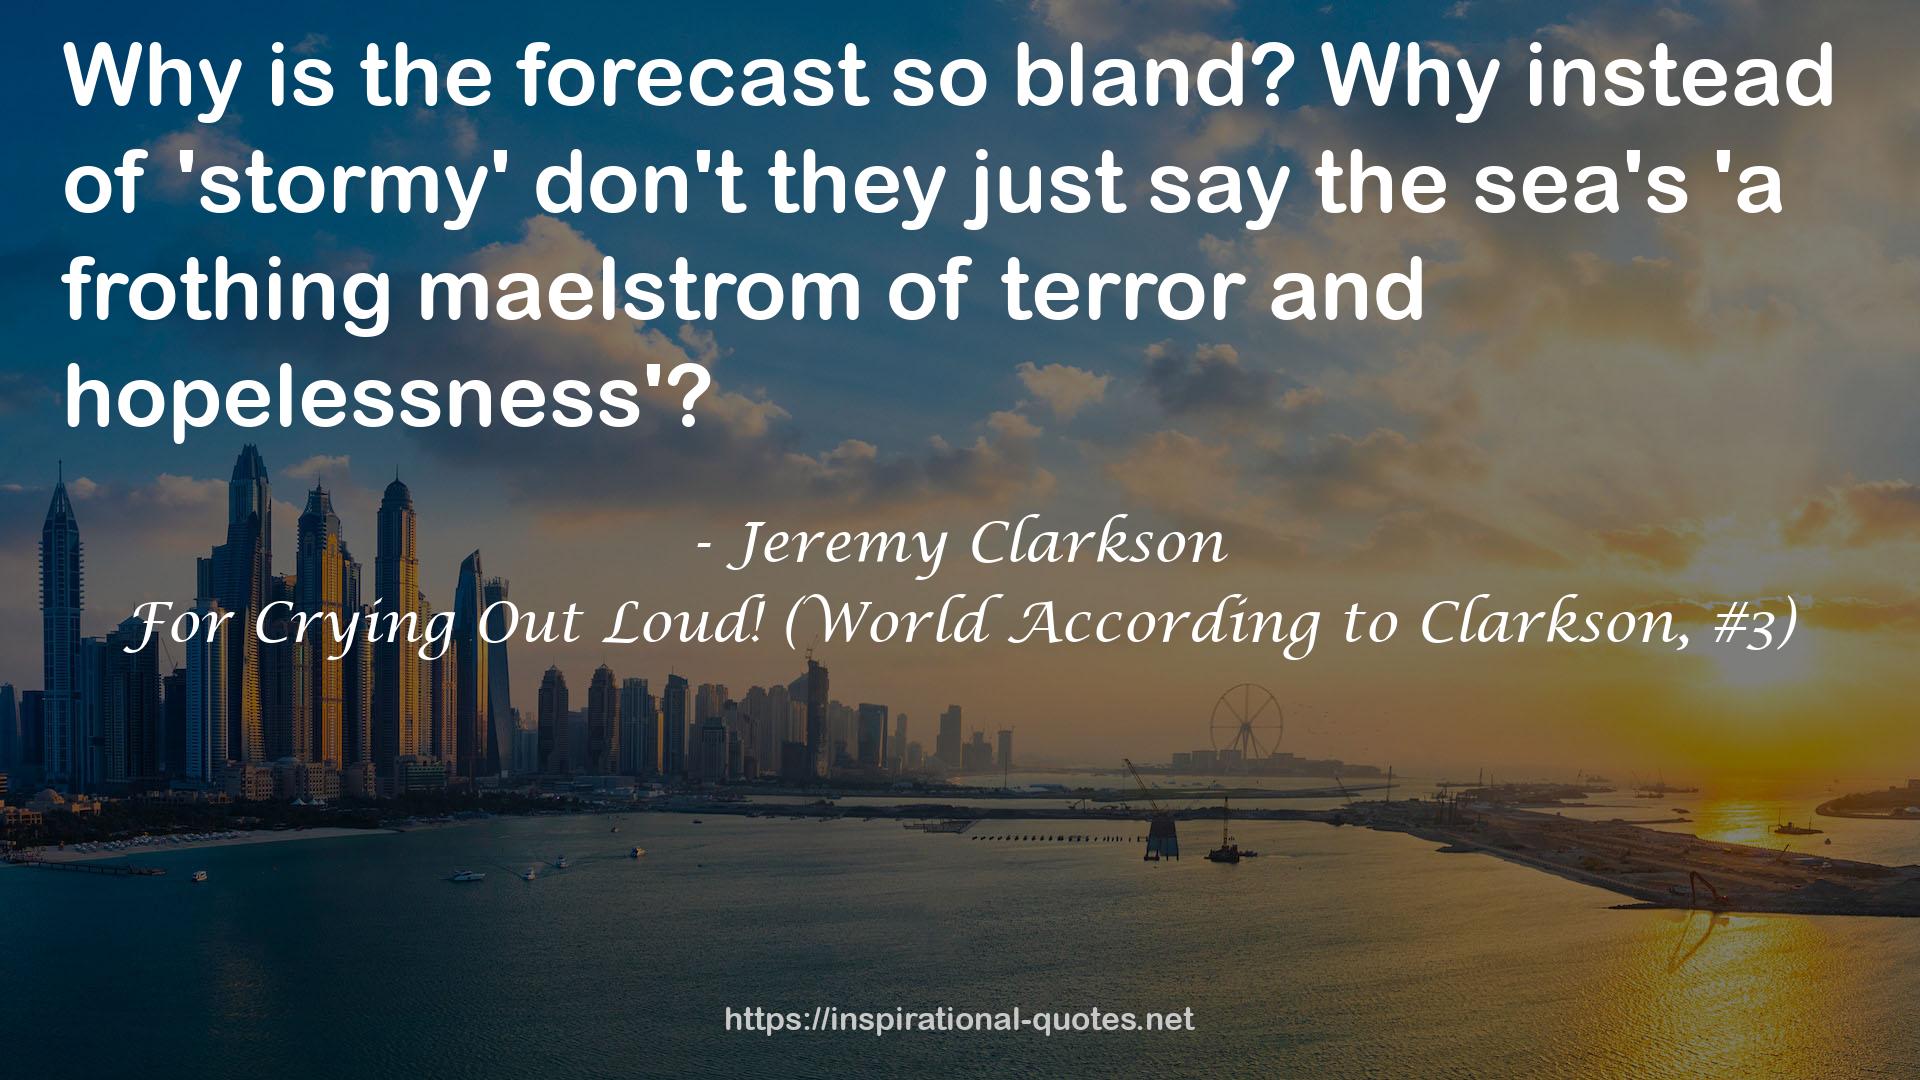 For Crying Out Loud! (World According to Clarkson, #3) QUOTES